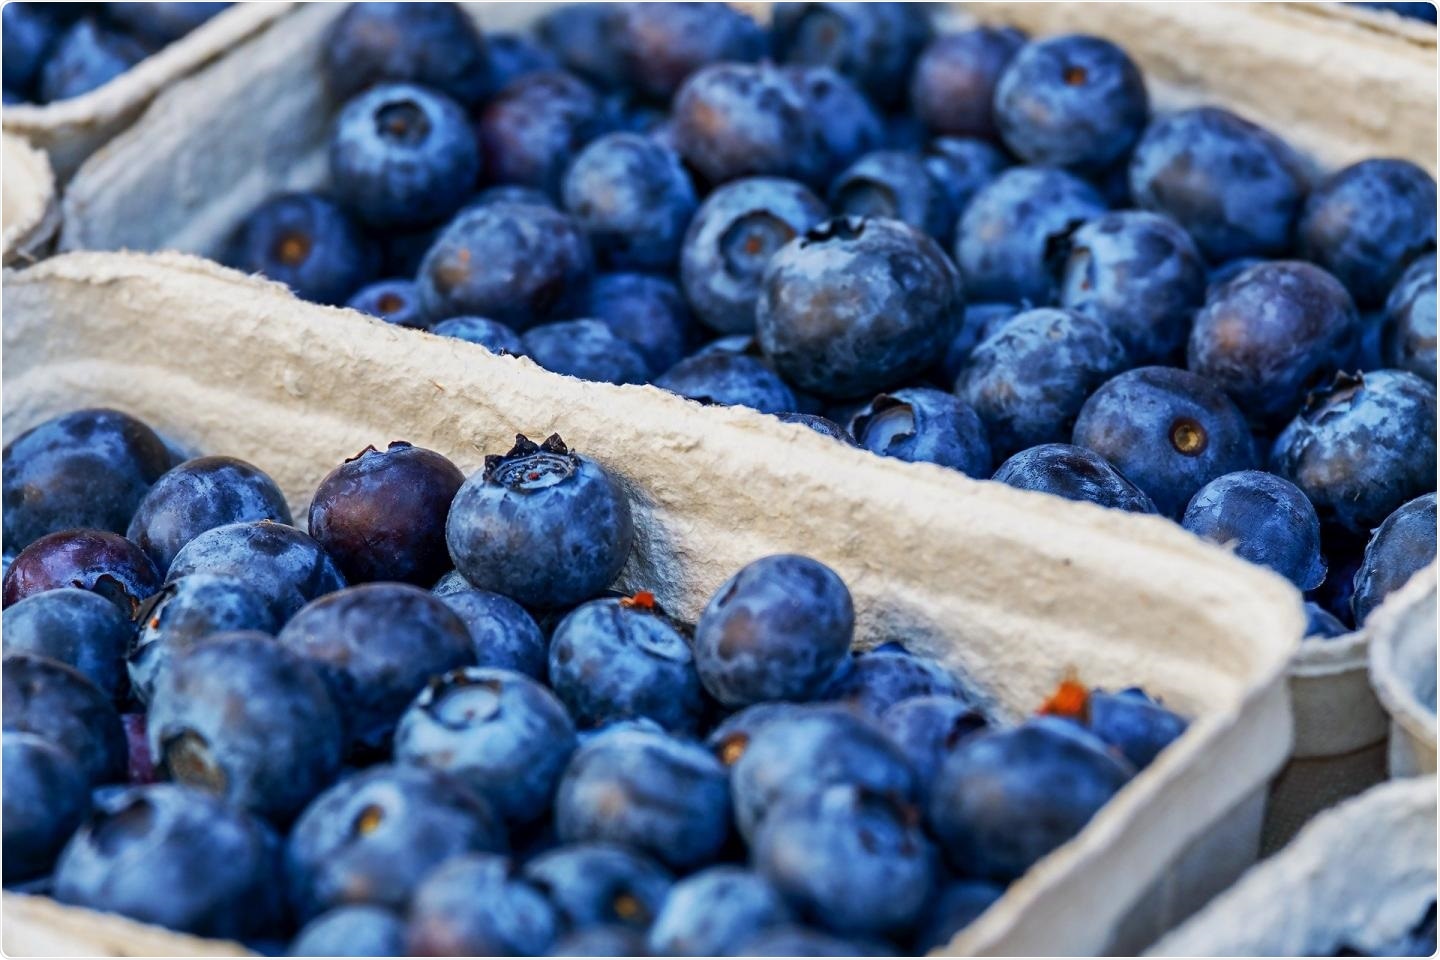 Polyphenolic compound extracted from blueberry can treat inflammatory bowel disease